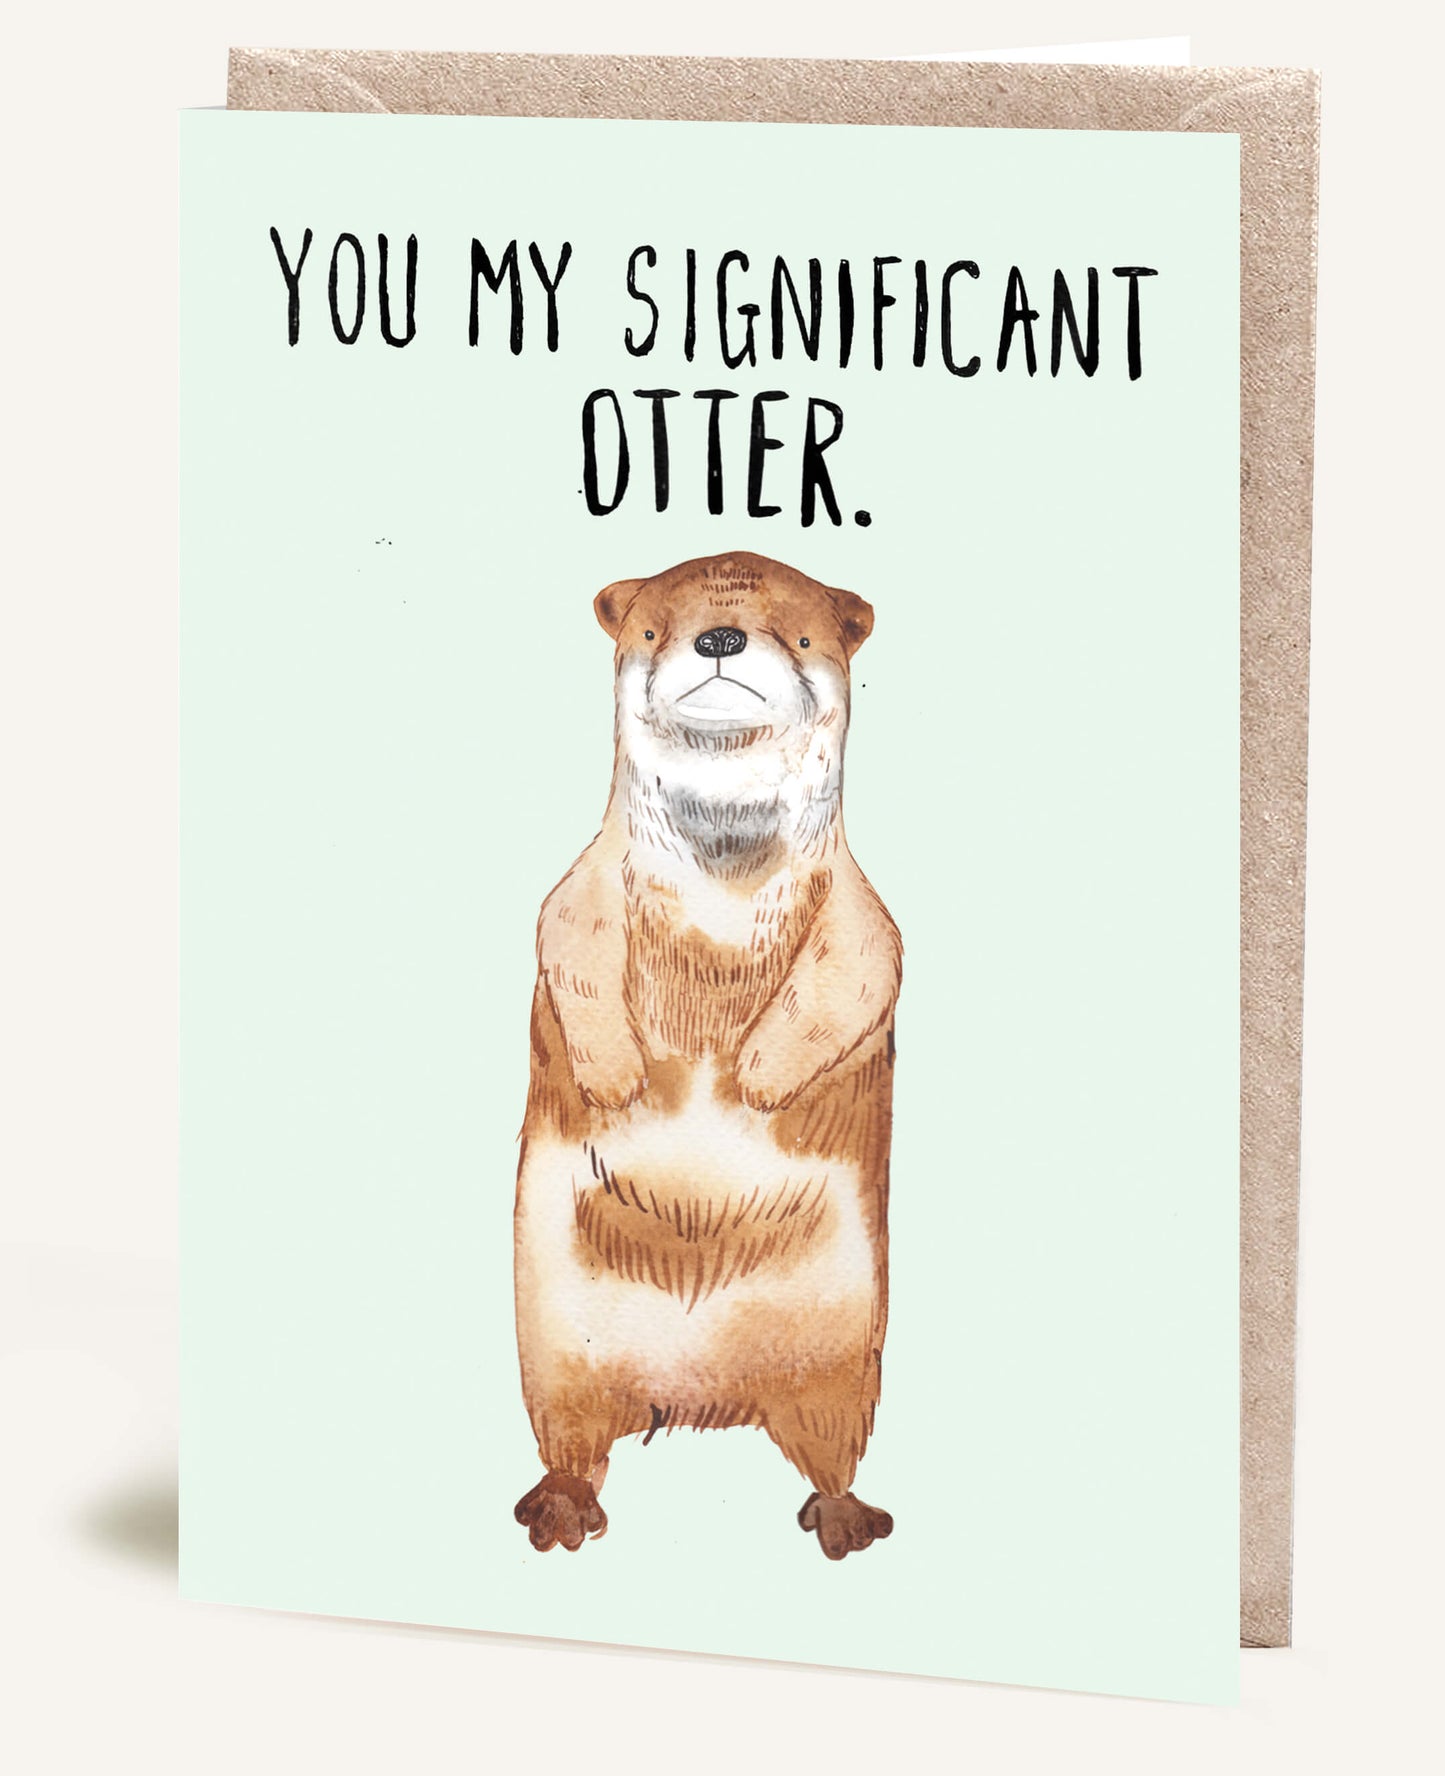 SIGNIFICANT OTTER